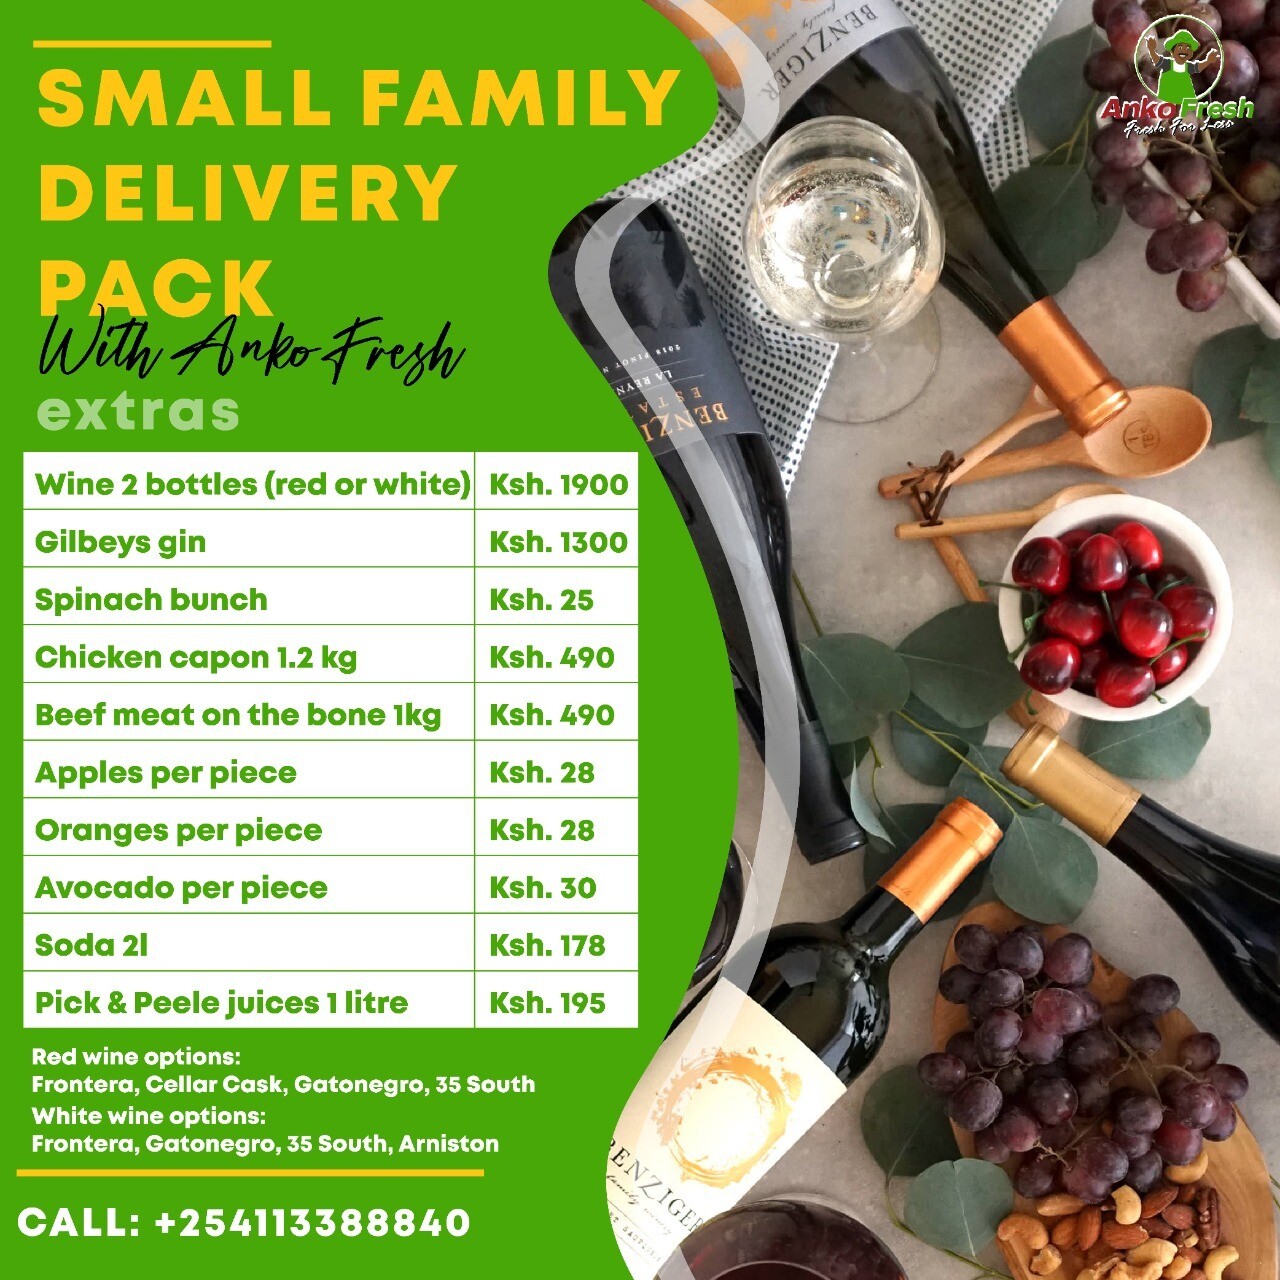 Single people, bachelors fruits & vegetables pack for 1 week . Follow link to choose extras meats, wine gin, milk etc.